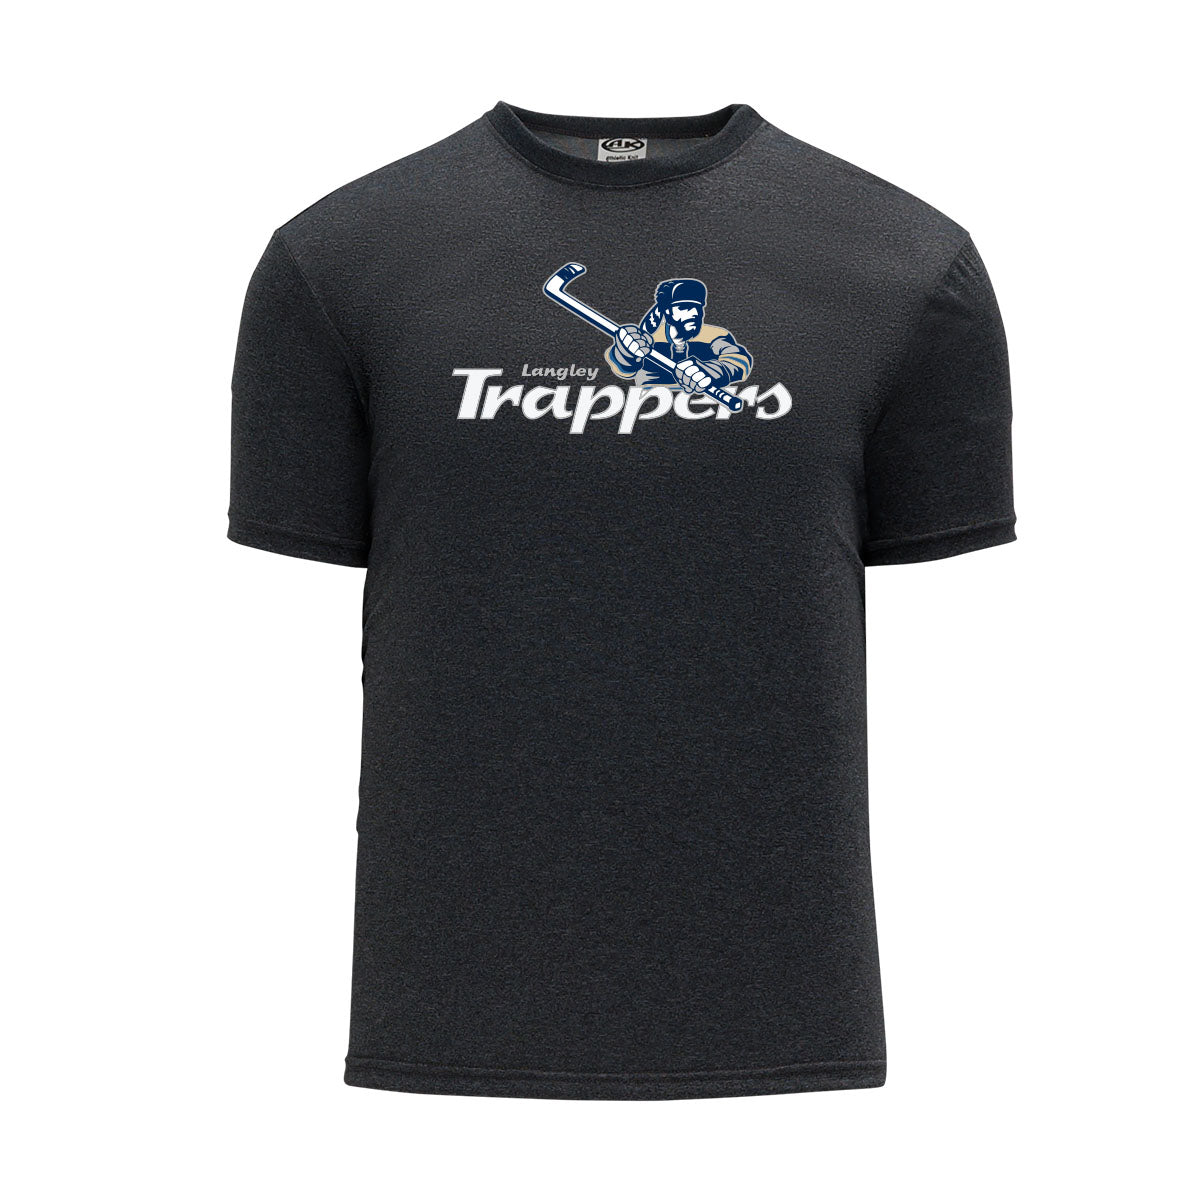 Langley Trappers -- Senior Tech Tee